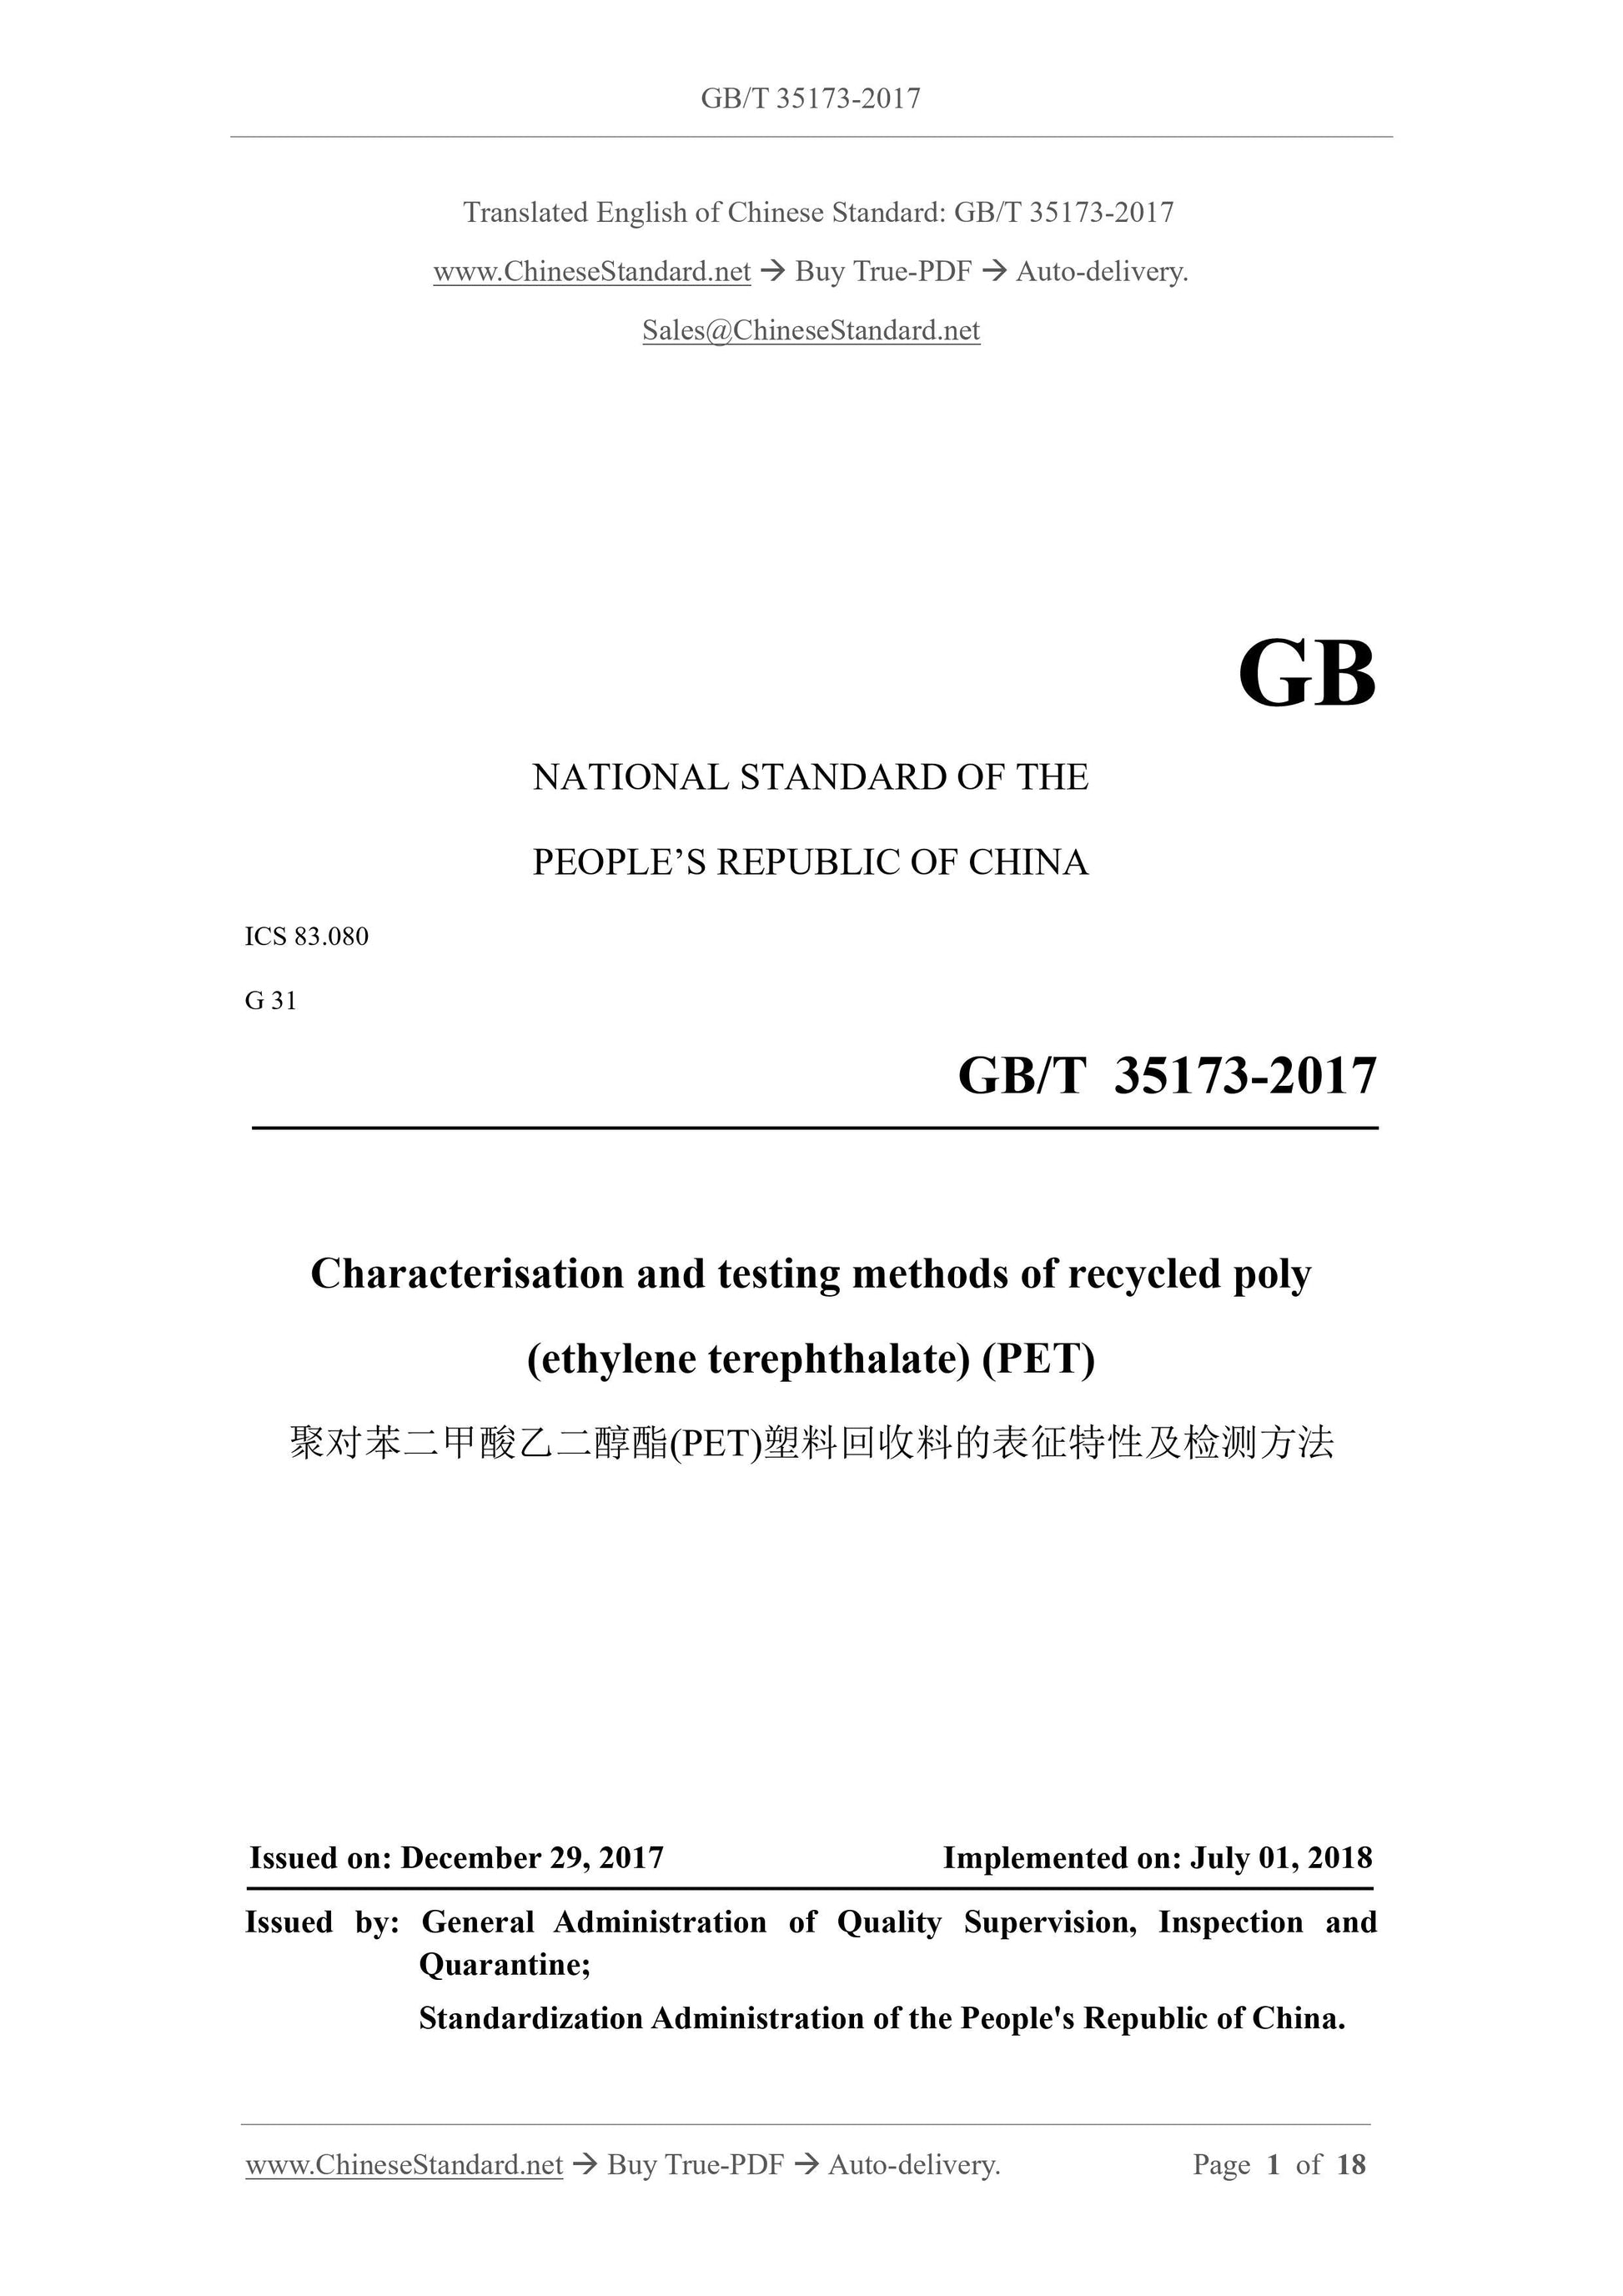 GB/T 35173-2017 Page 1